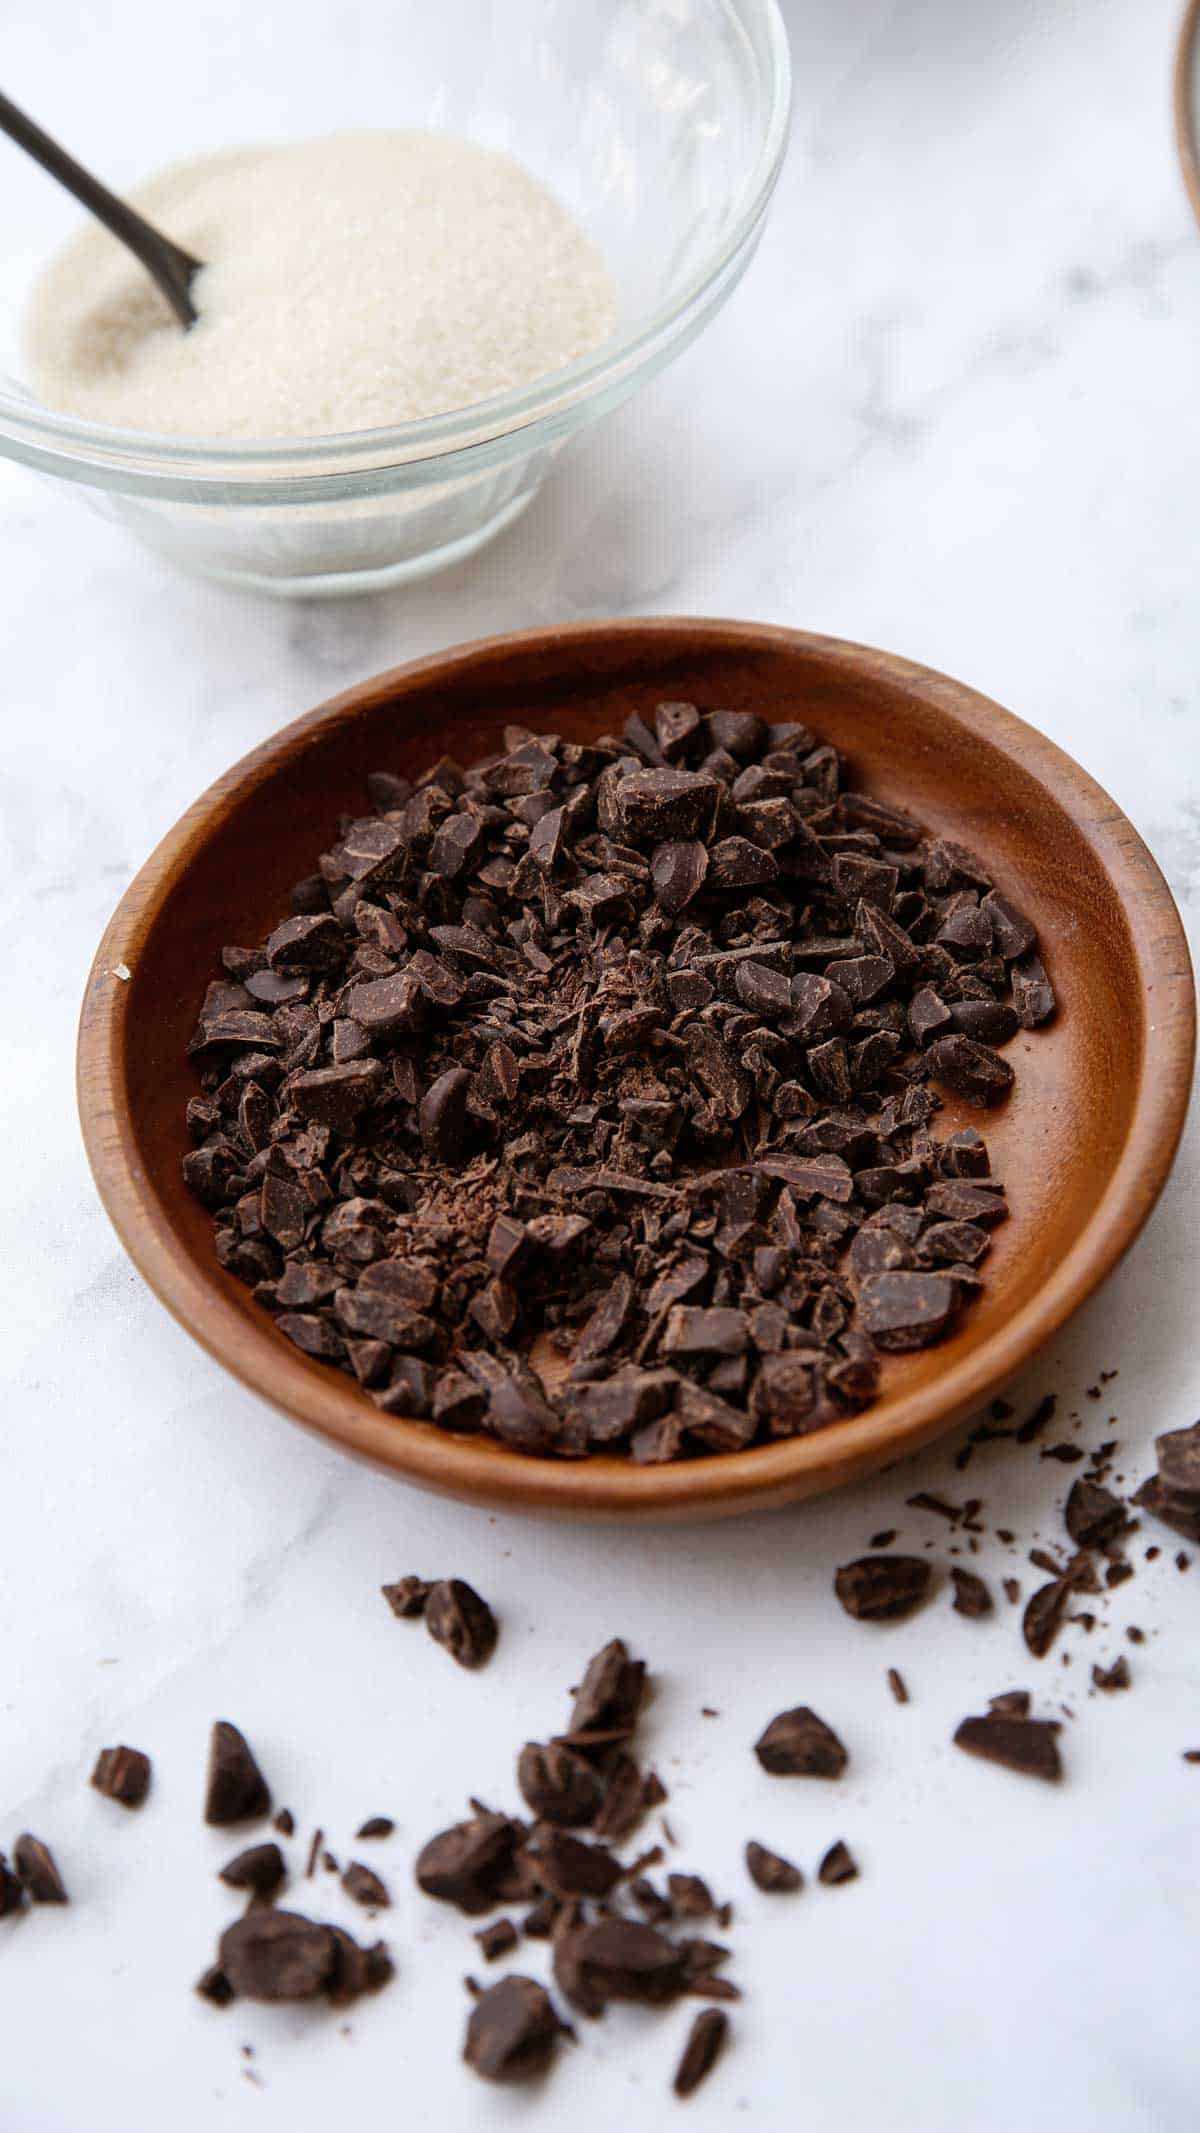 Dark Chocolate Chips chopped in place on a wooden plate with a bowl of sugar in the background